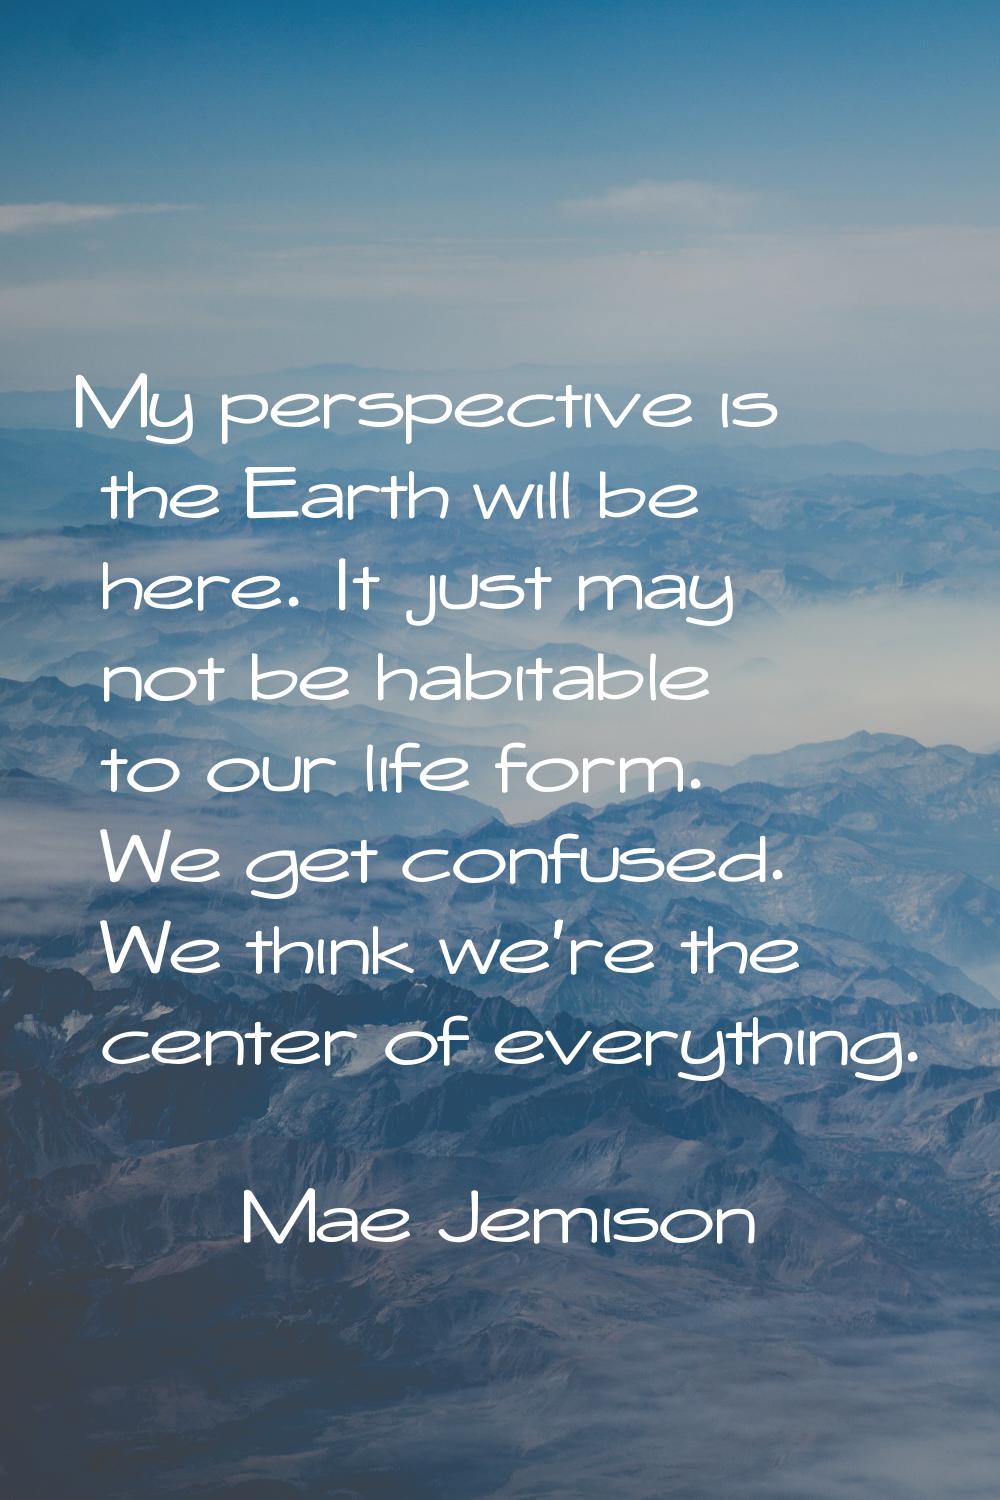 My perspective is the Earth will be here. It just may not be habitable to our life form. We get con